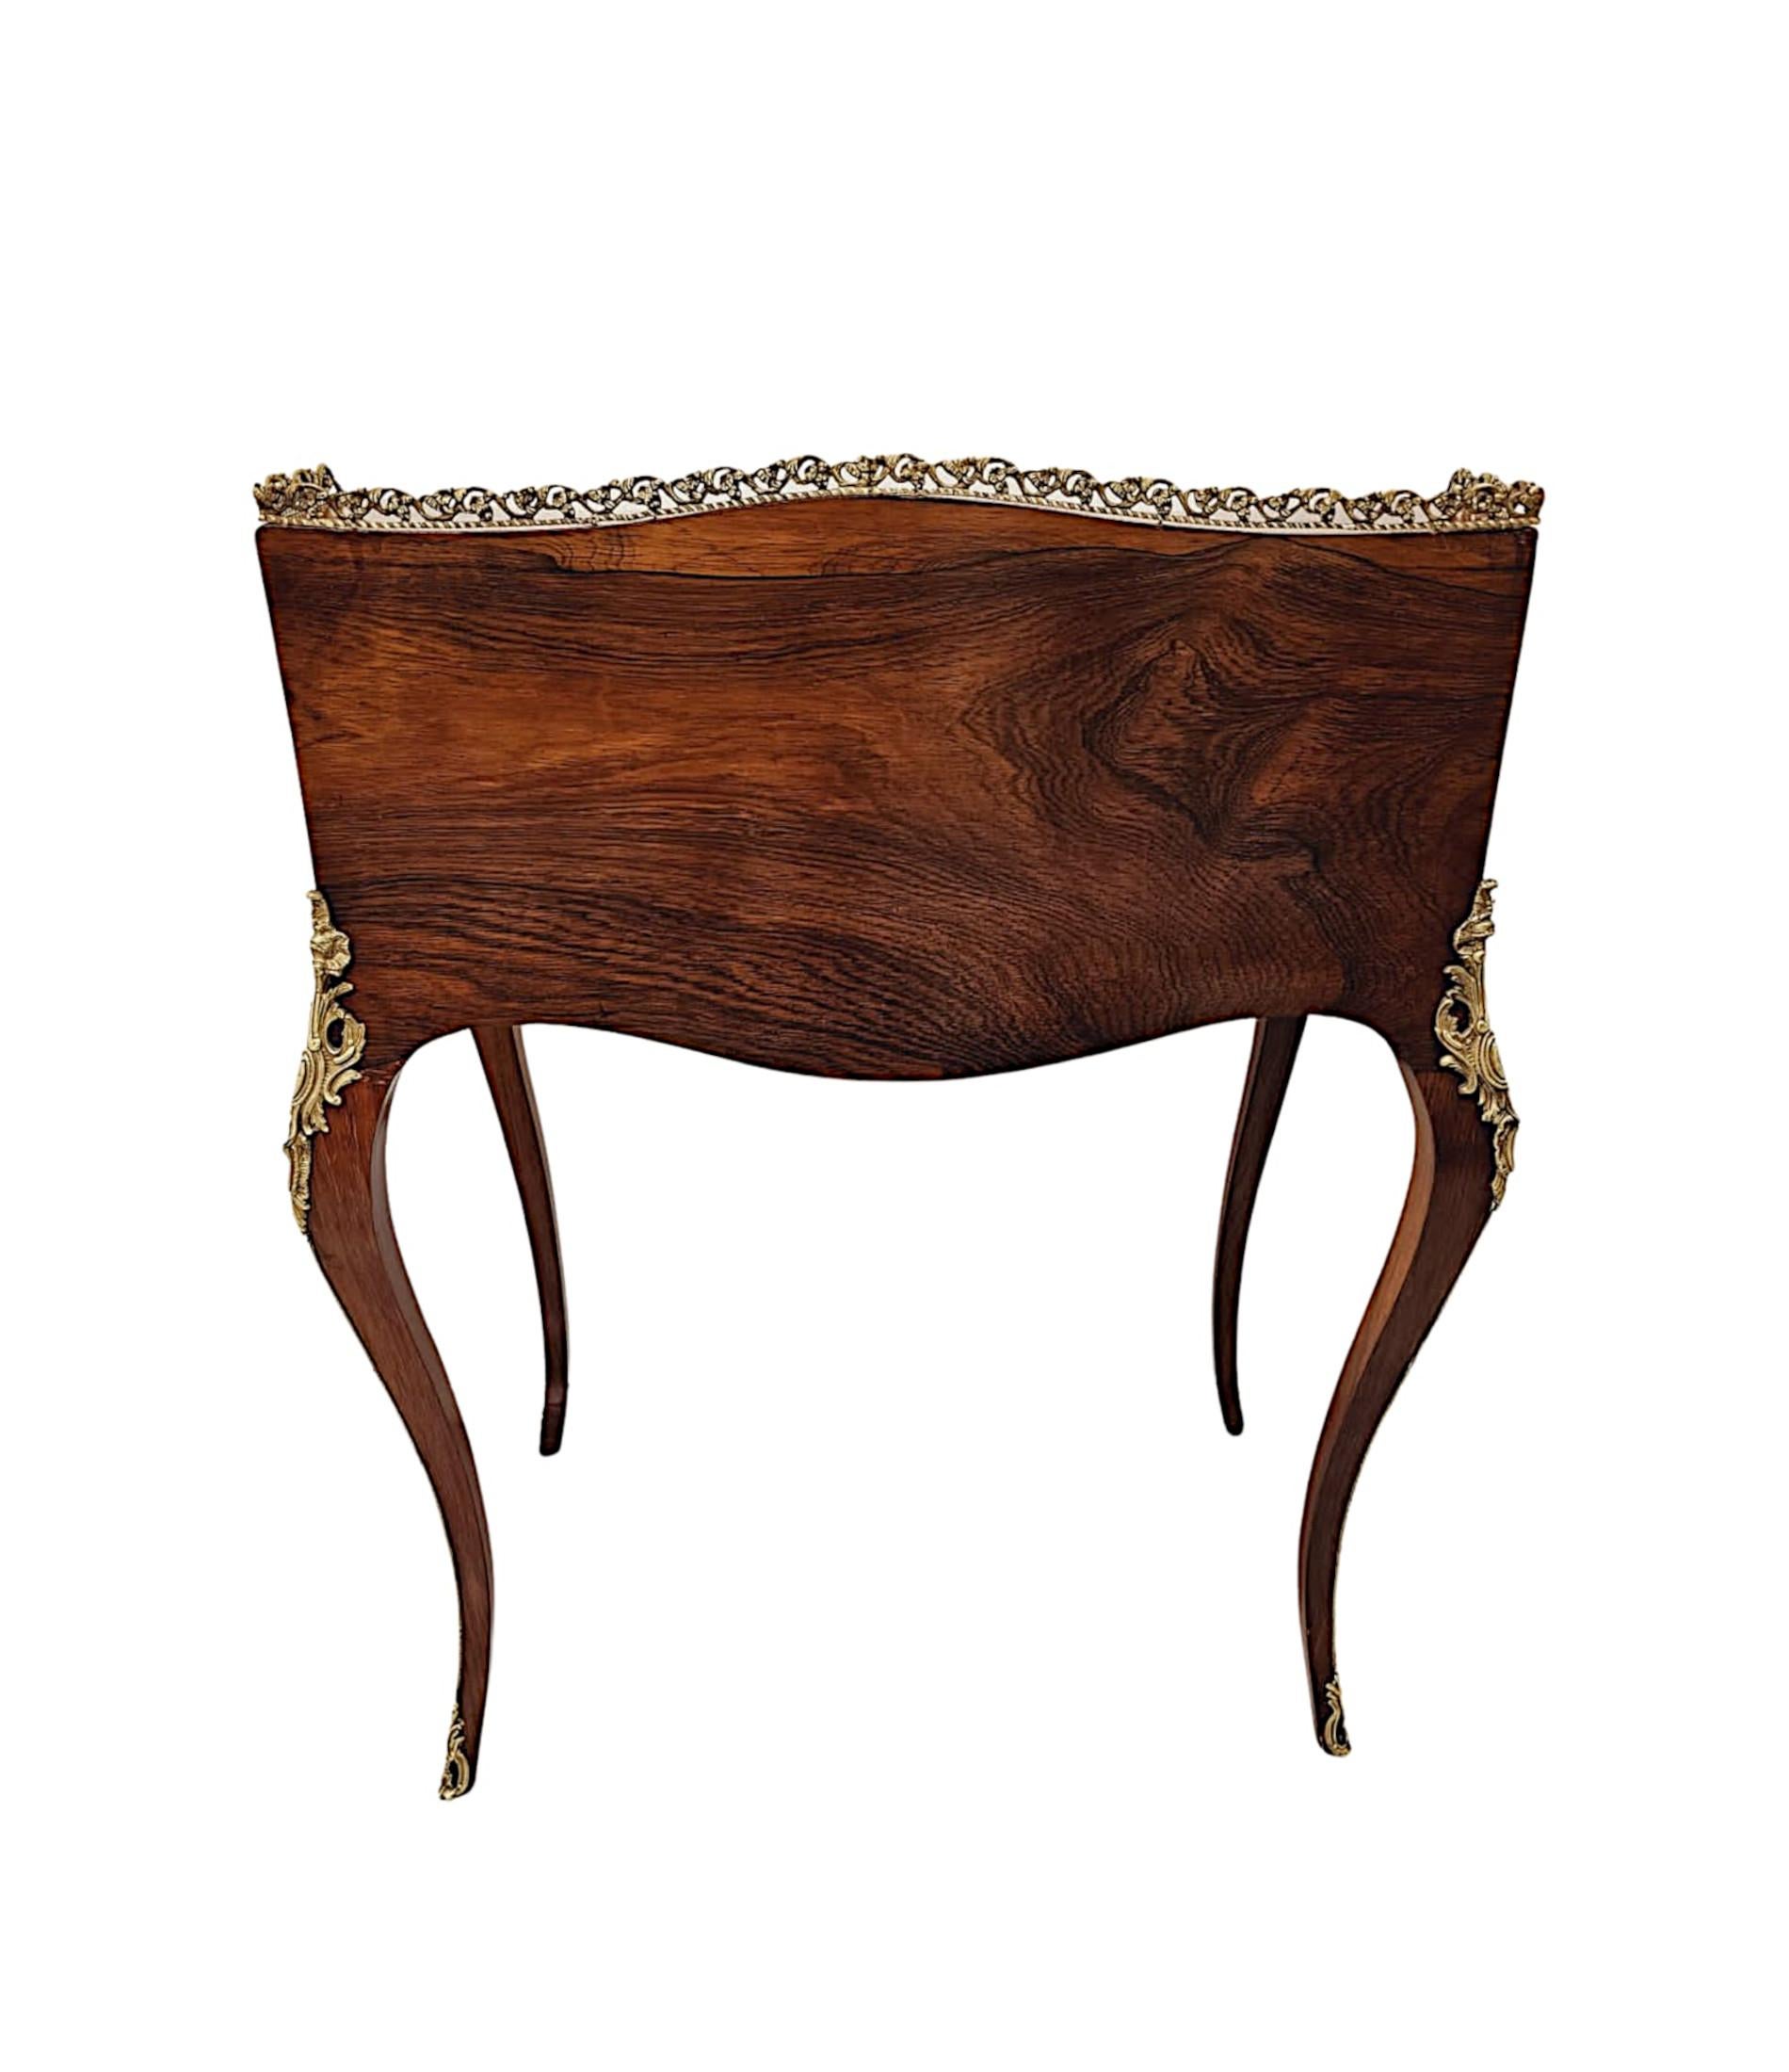 A Very Fine 19th Century Marquetry Inlaid Bureau Du Dame For Sale 5